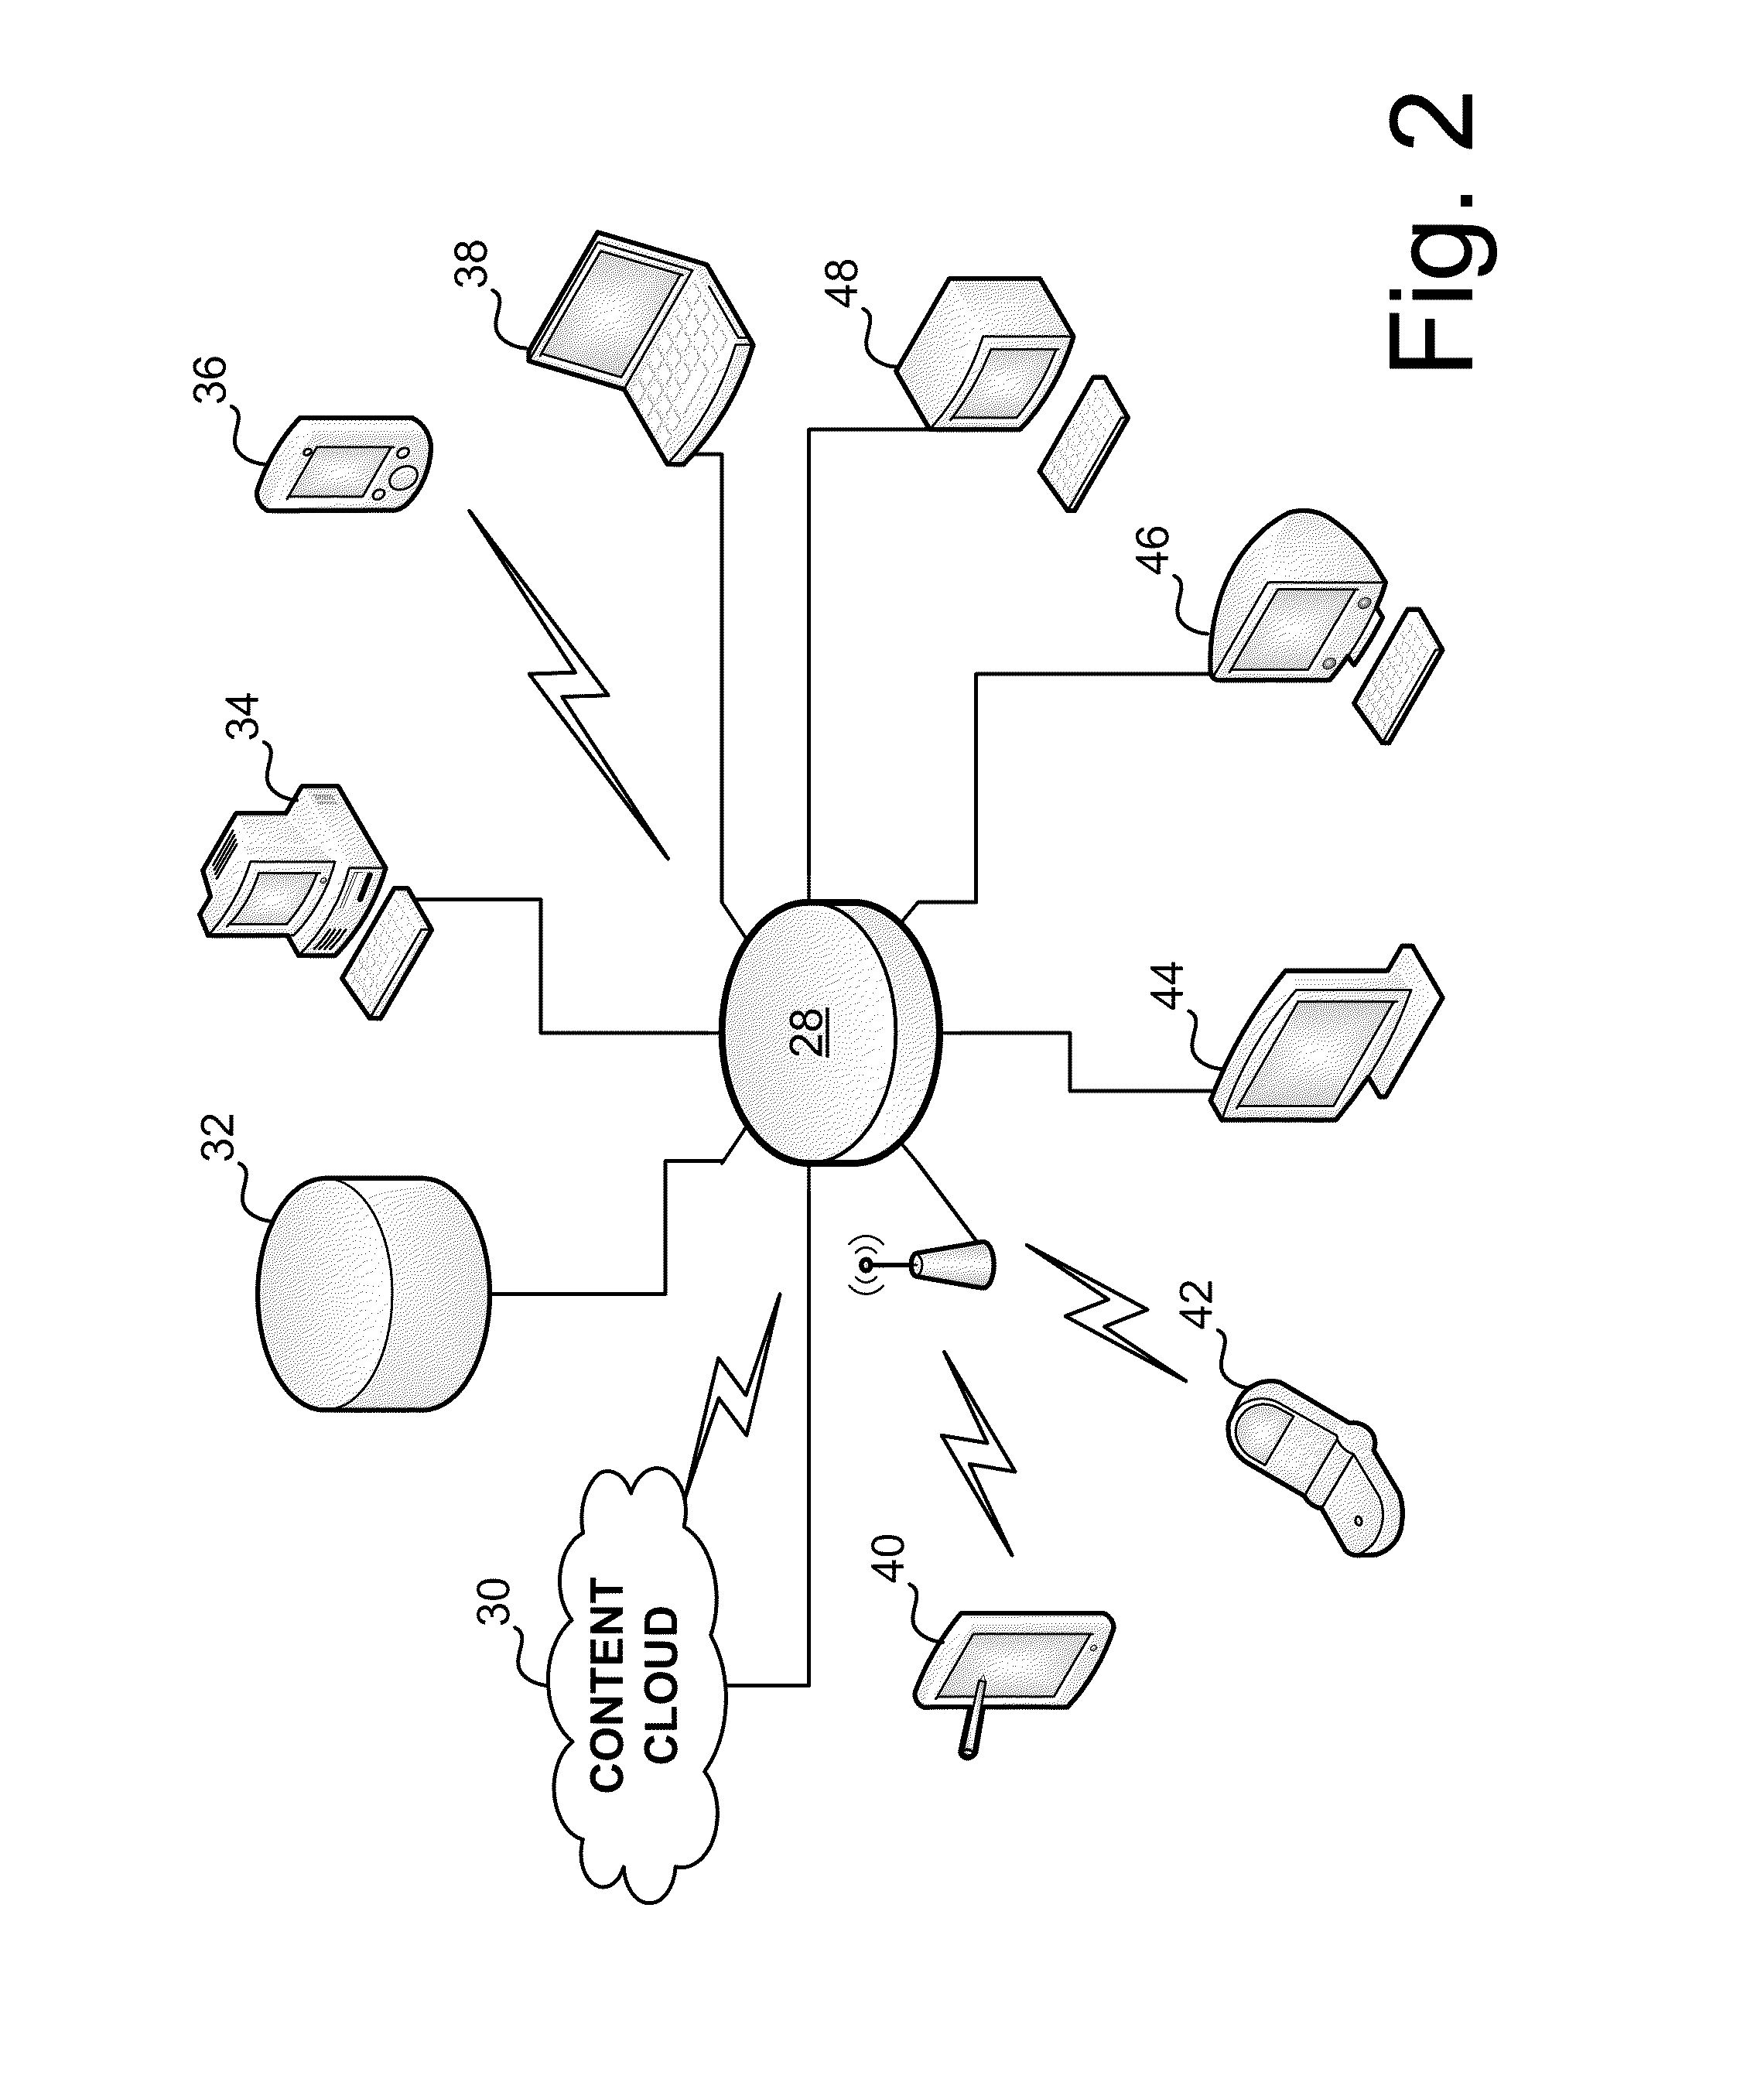 Method of scanning, analyzing and identifying electro magnetic field sources